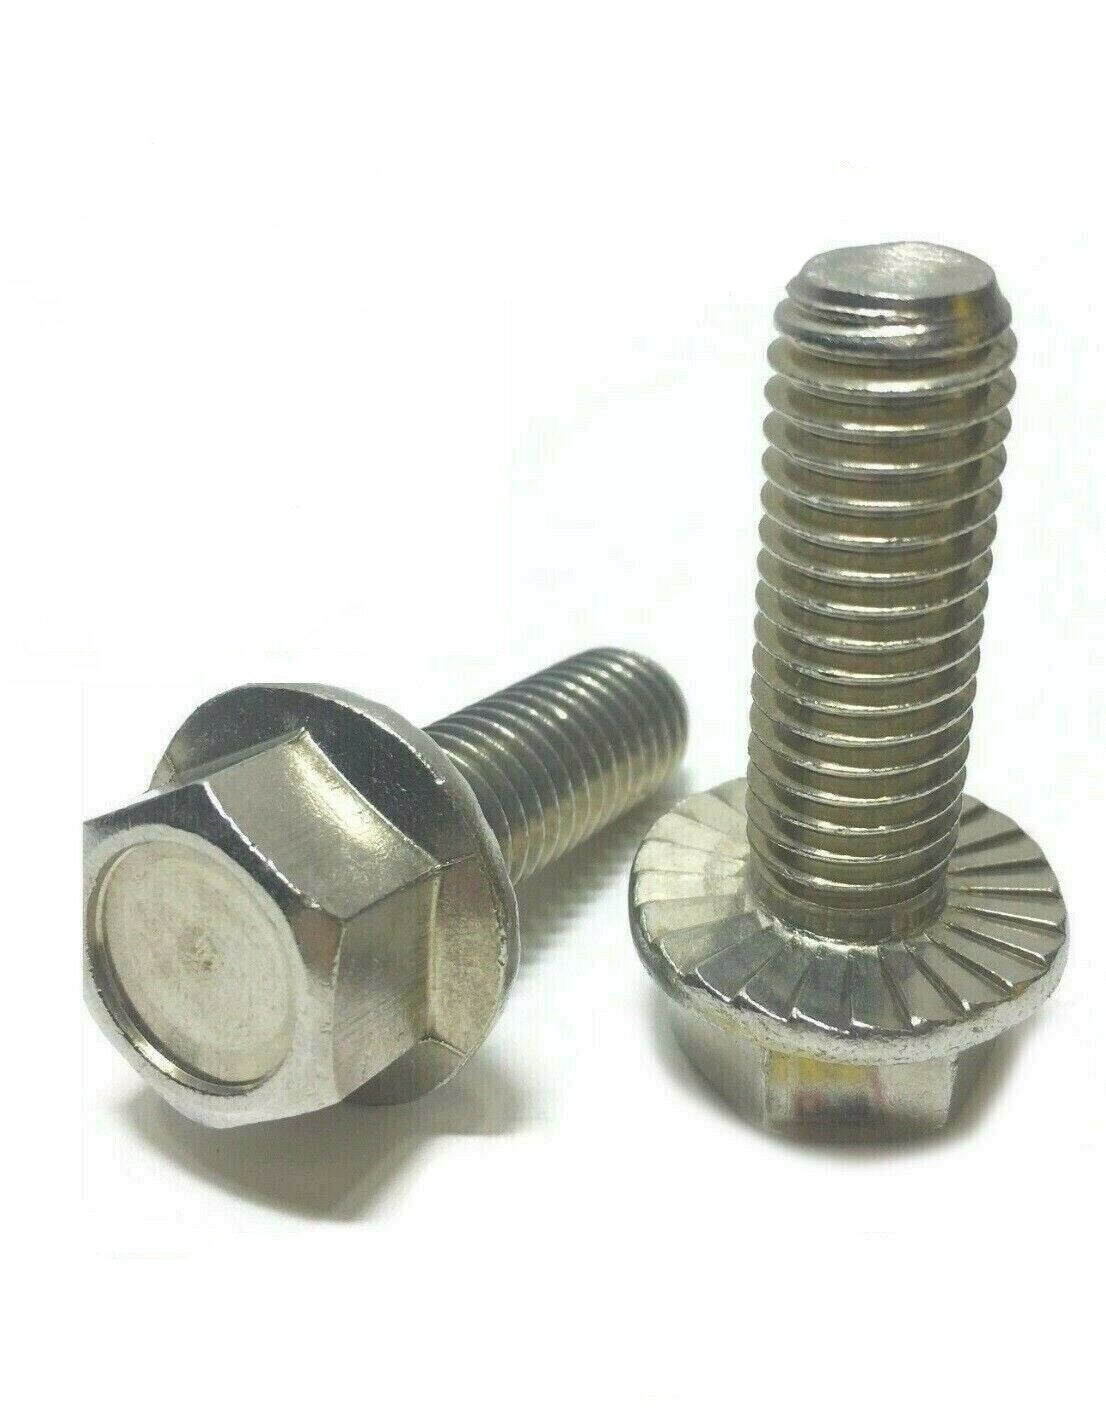 M8-1.25 x 30MM Stainless Steel Hex Cap Flange Bolt Serrated Metric